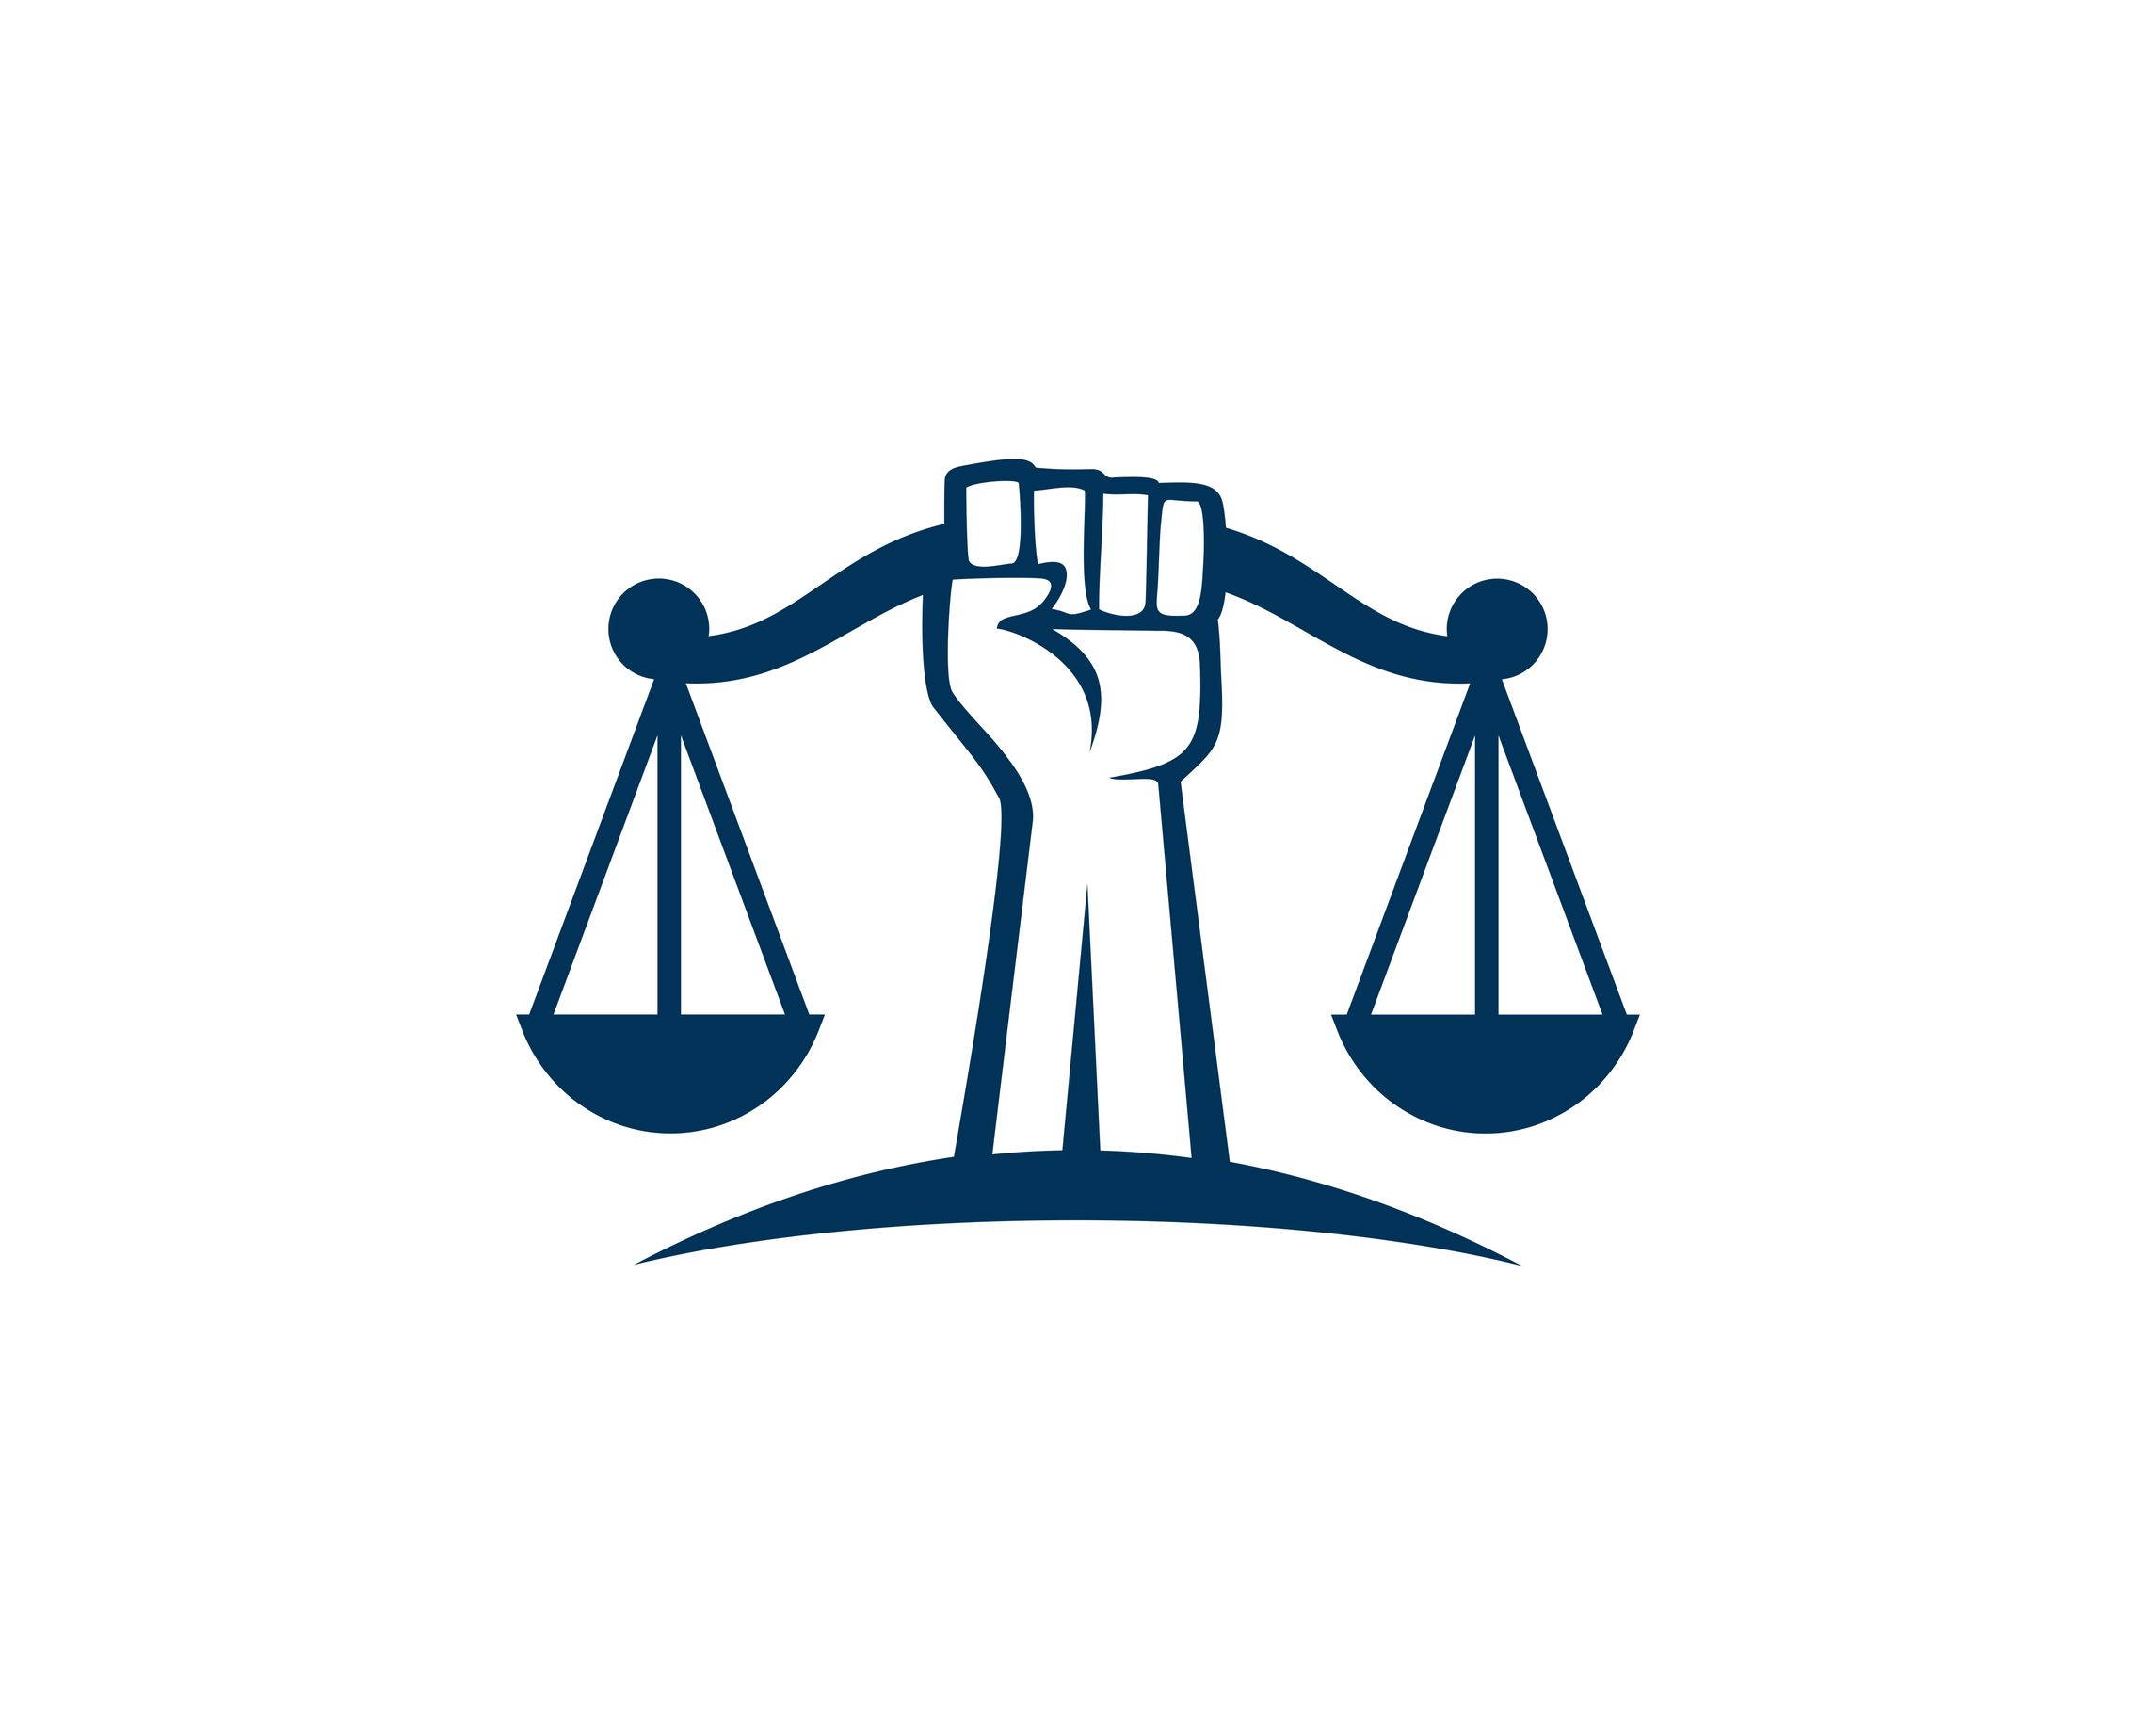 Icon of a clenched fist holding up a scale of justice